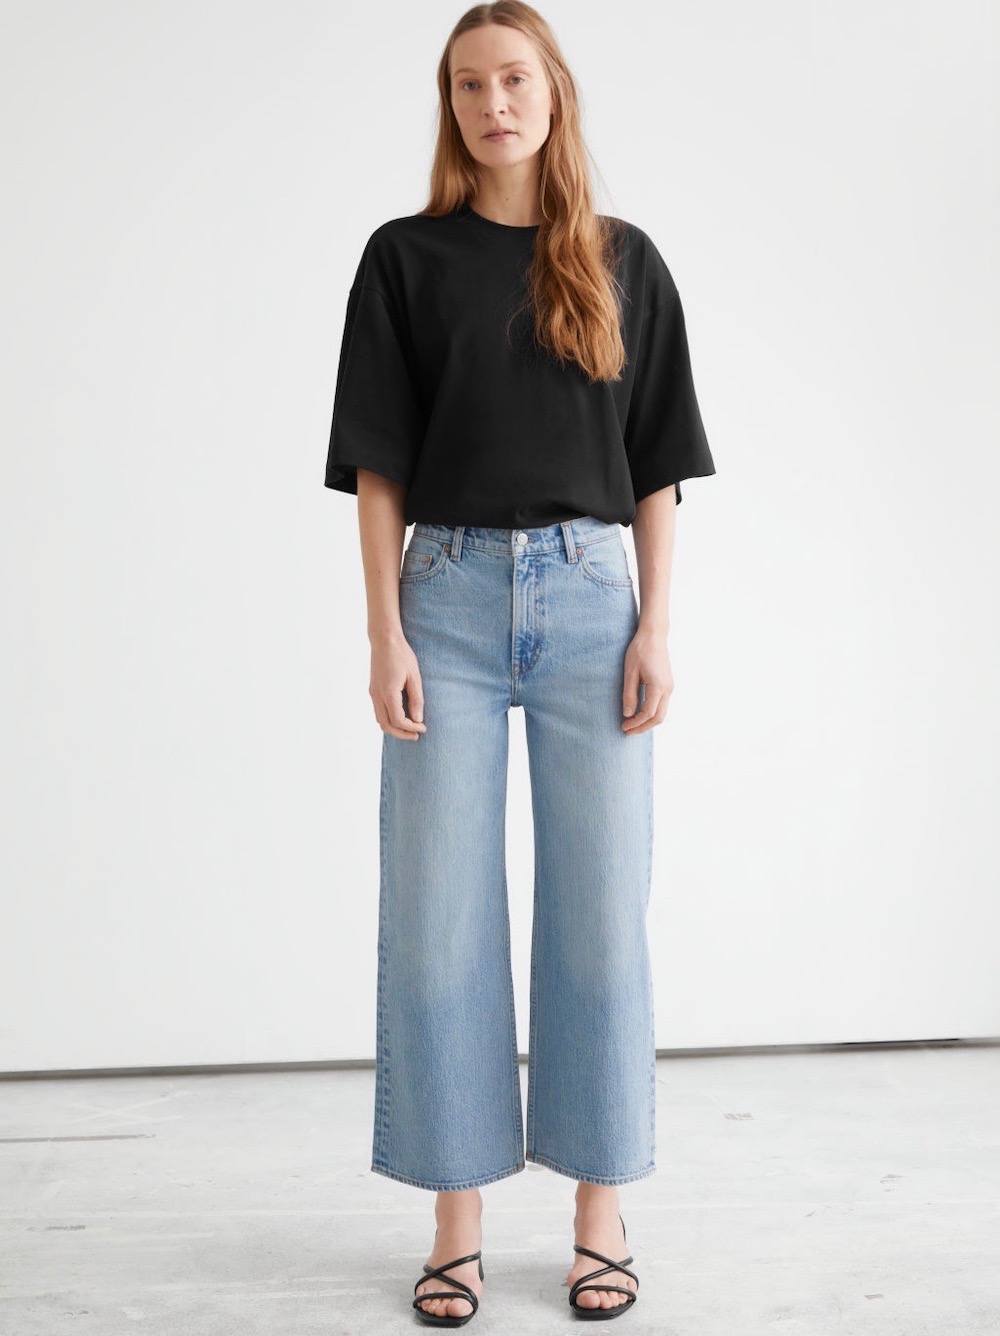 Cropped Pants to Wear With Summer Tops in Fall - theFashionSpot